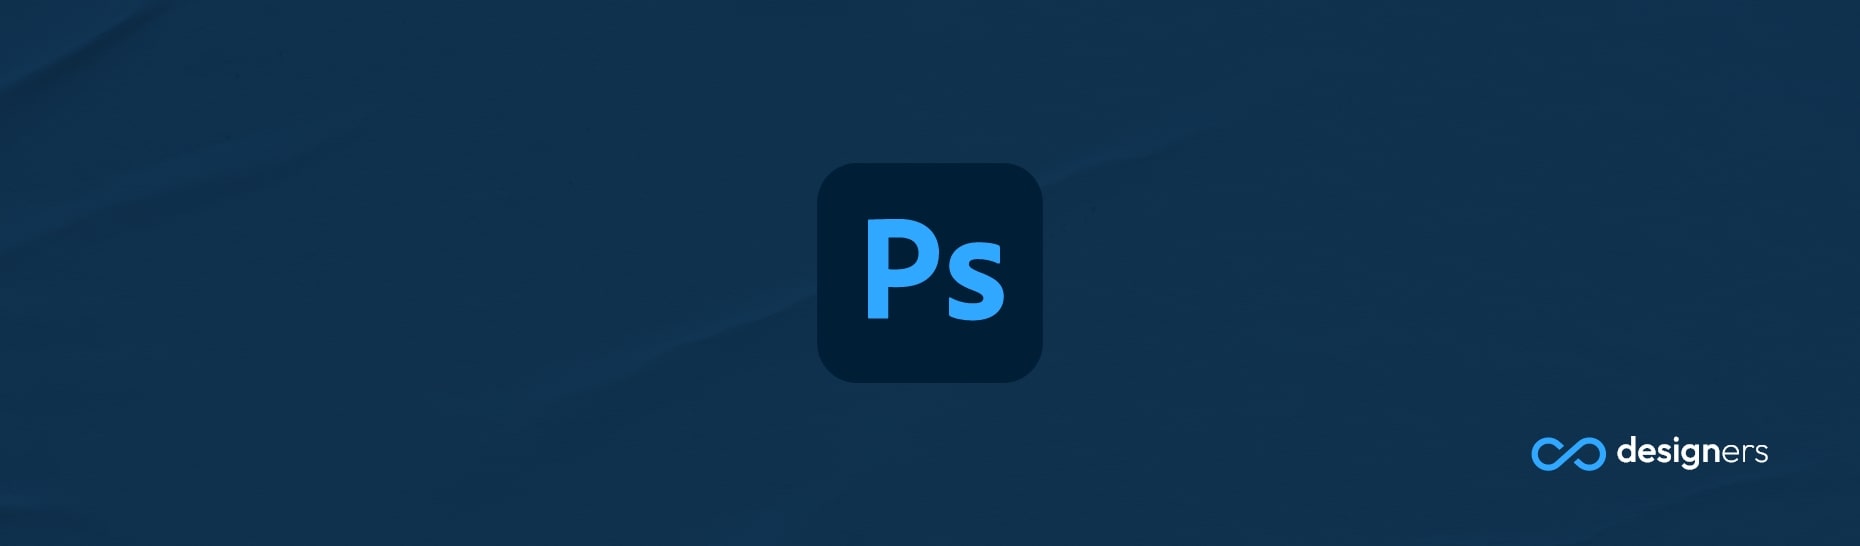 What Are the Minimum System Requirements to Run Photoshop?